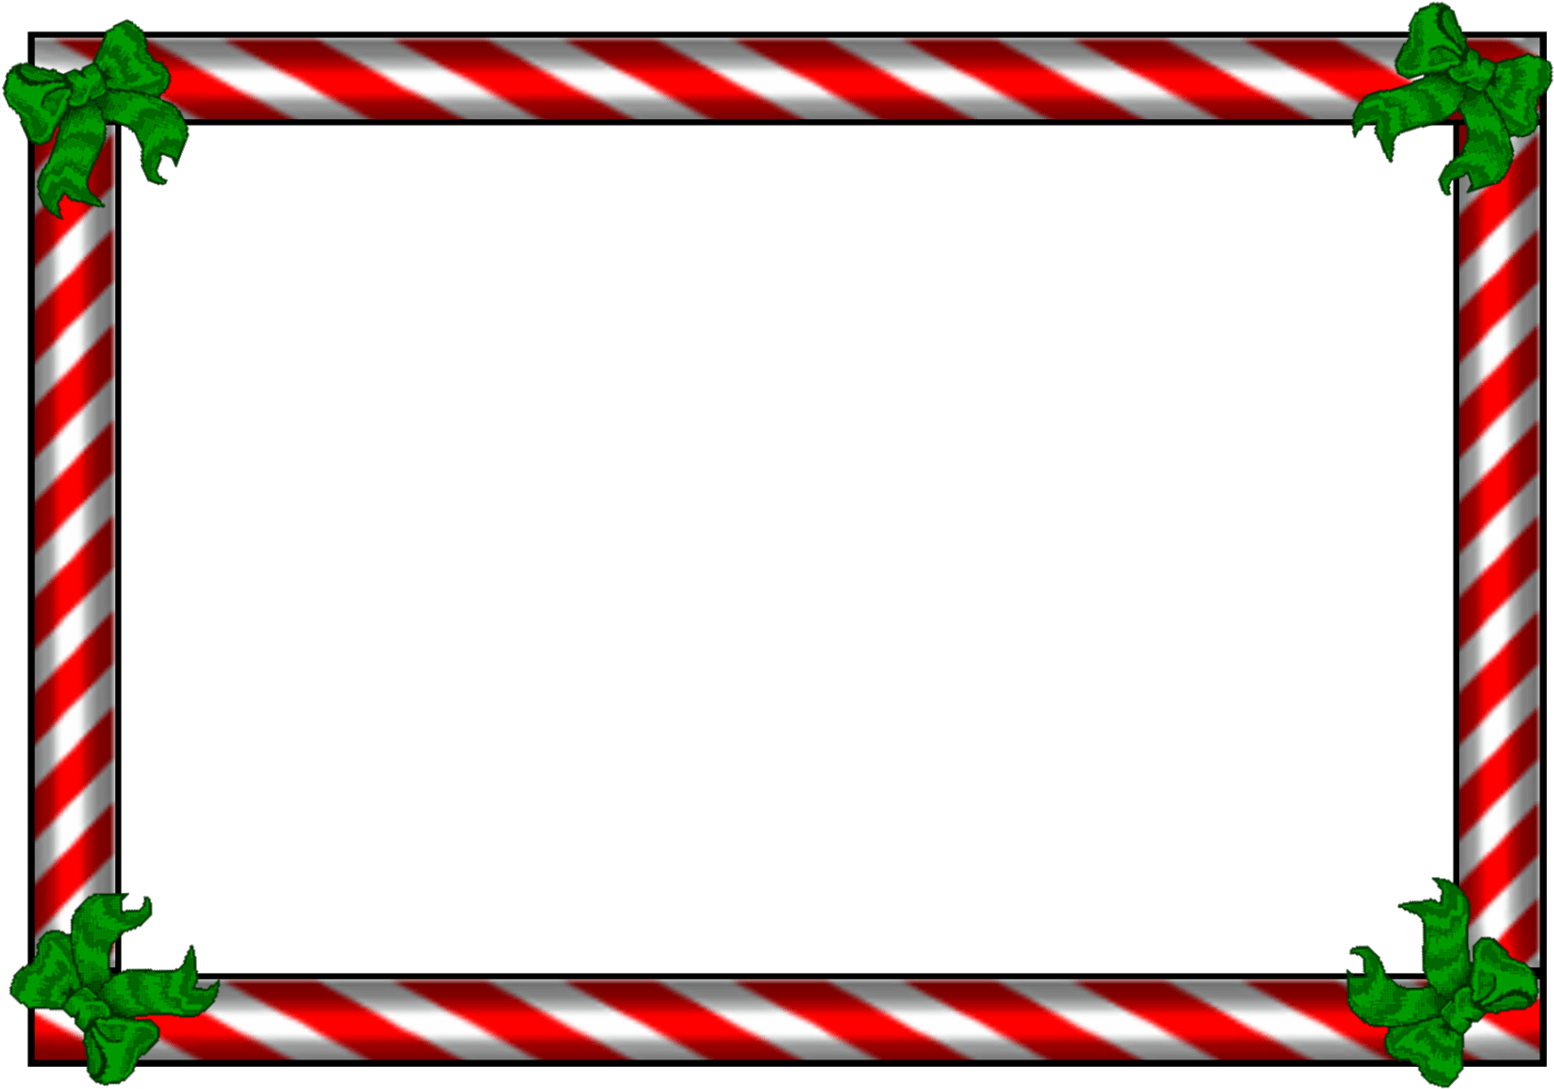 Candy Cane Frame PNG Image